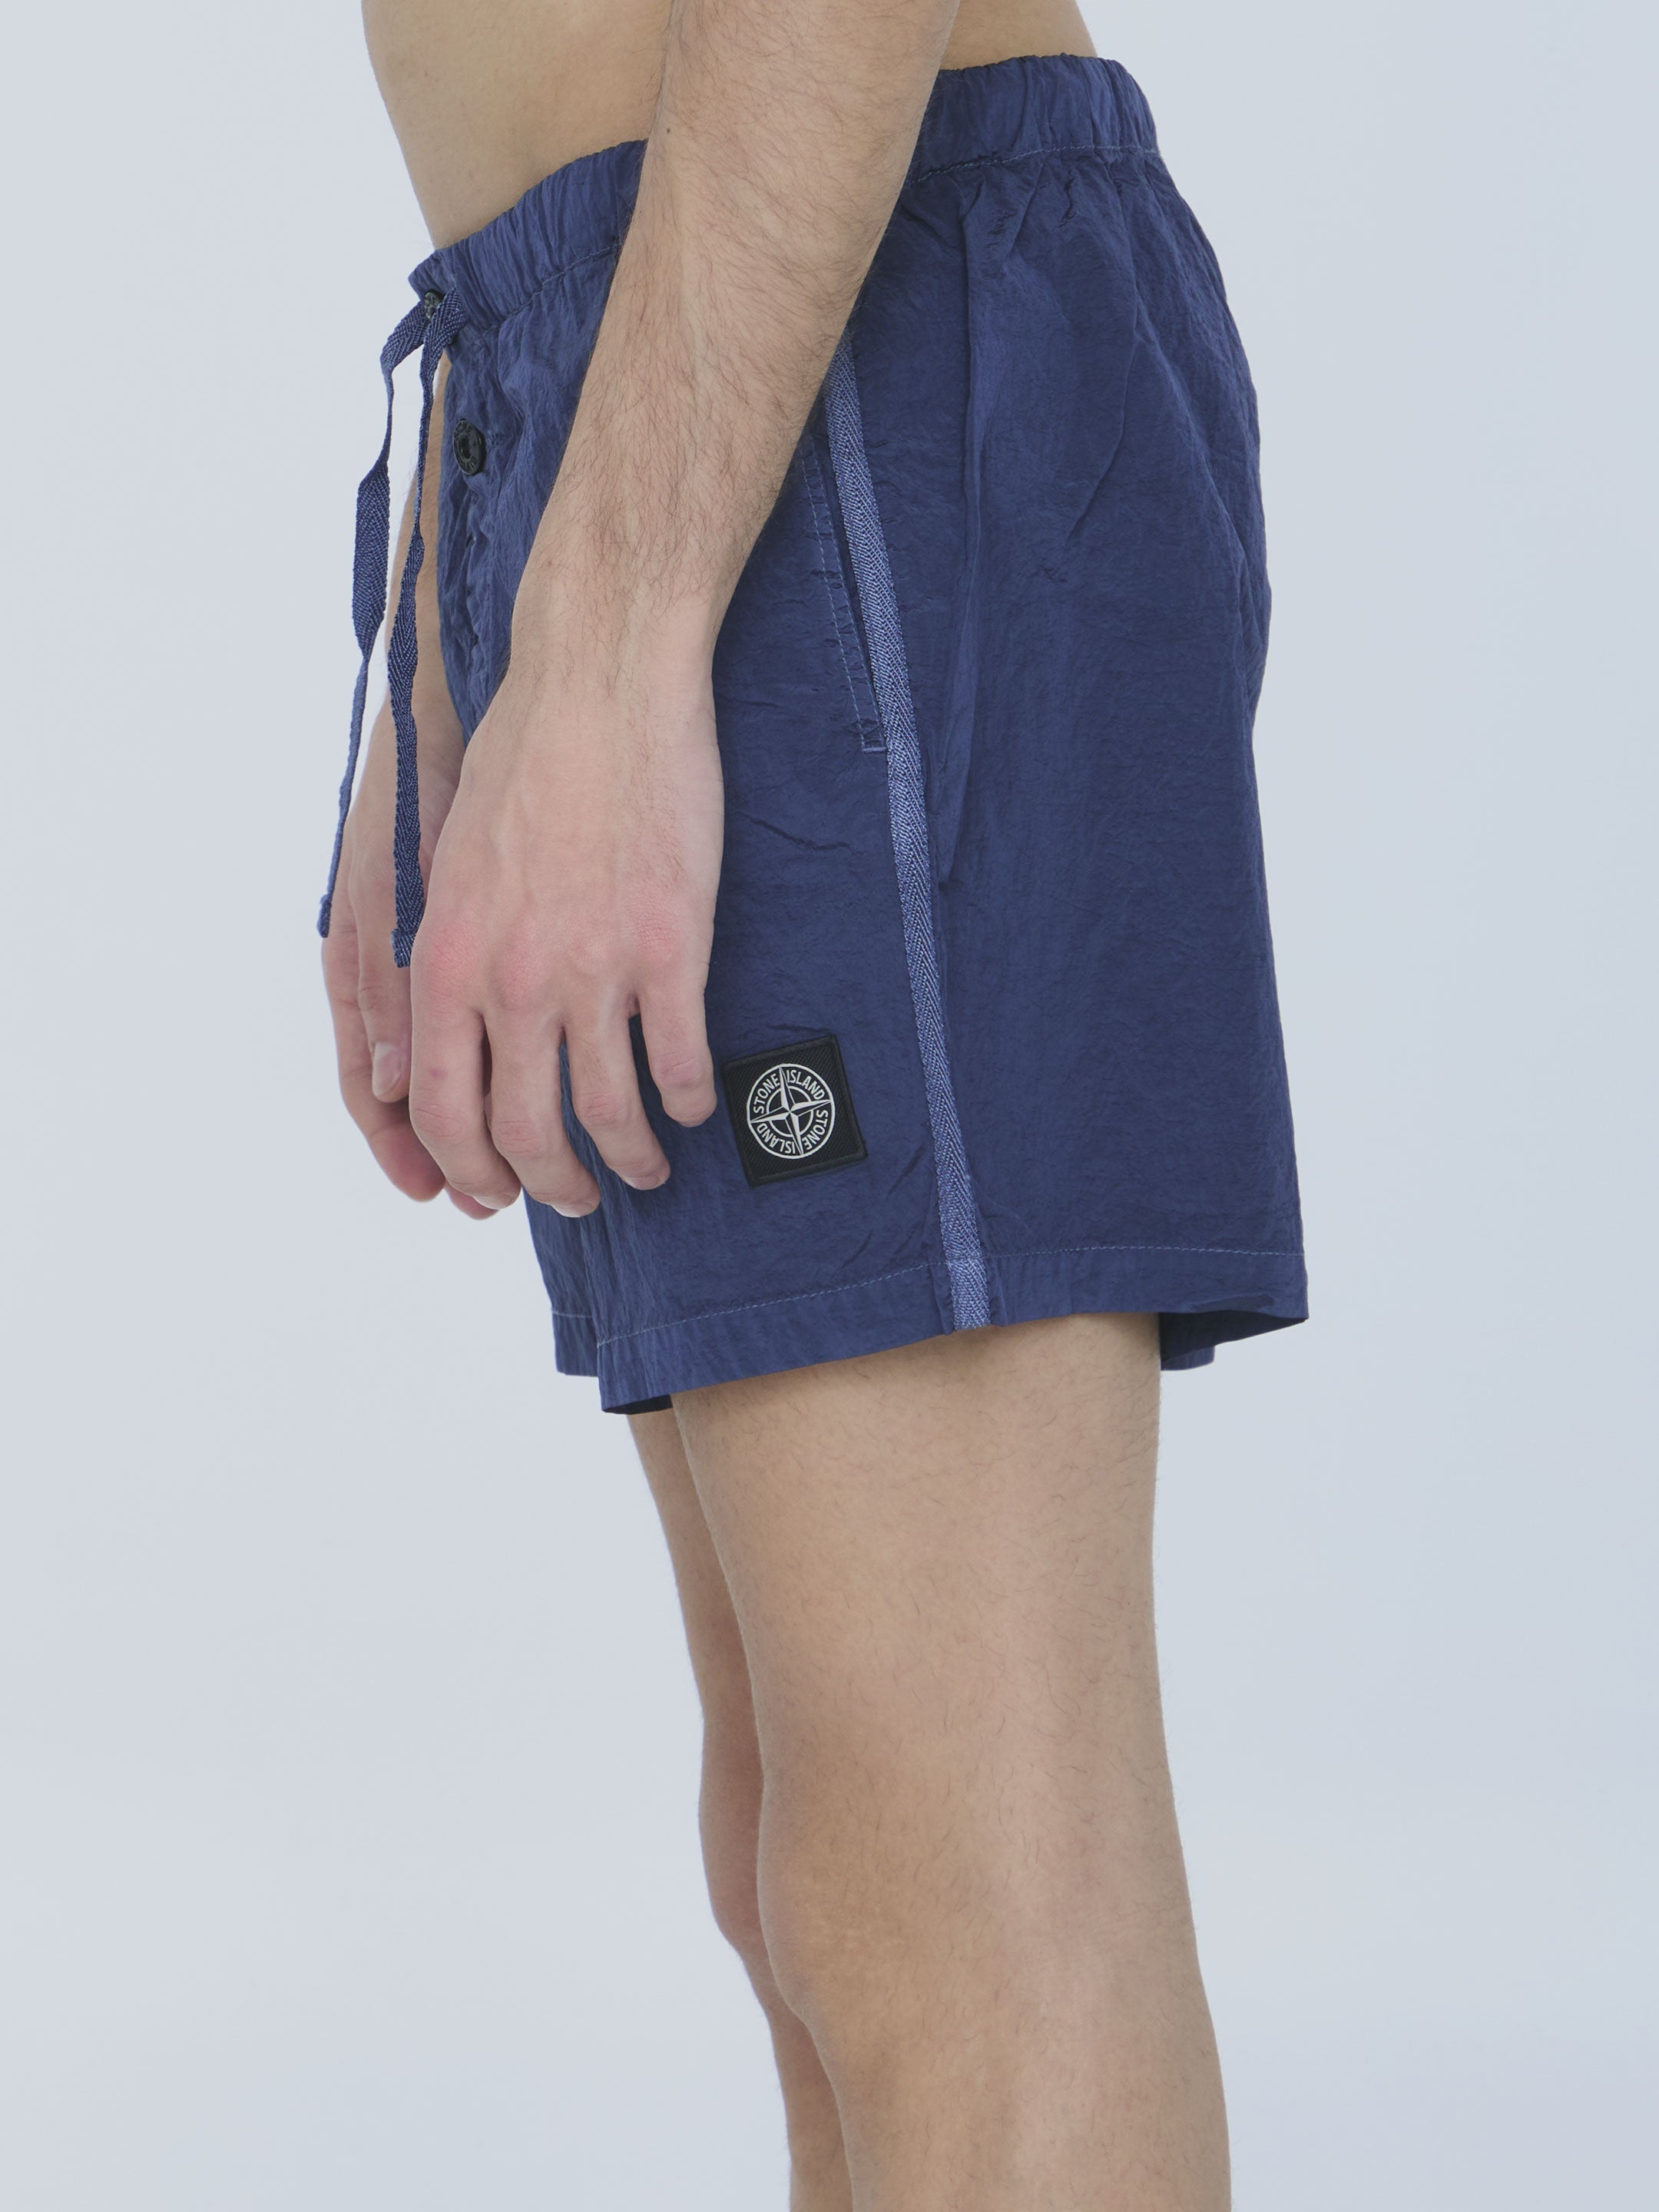 STONE-ISLAND-OUTLET-SALE-Swim-shorts-with-logo-Badebekleidung-ARCHIVE-COLLECTION-3.jpg